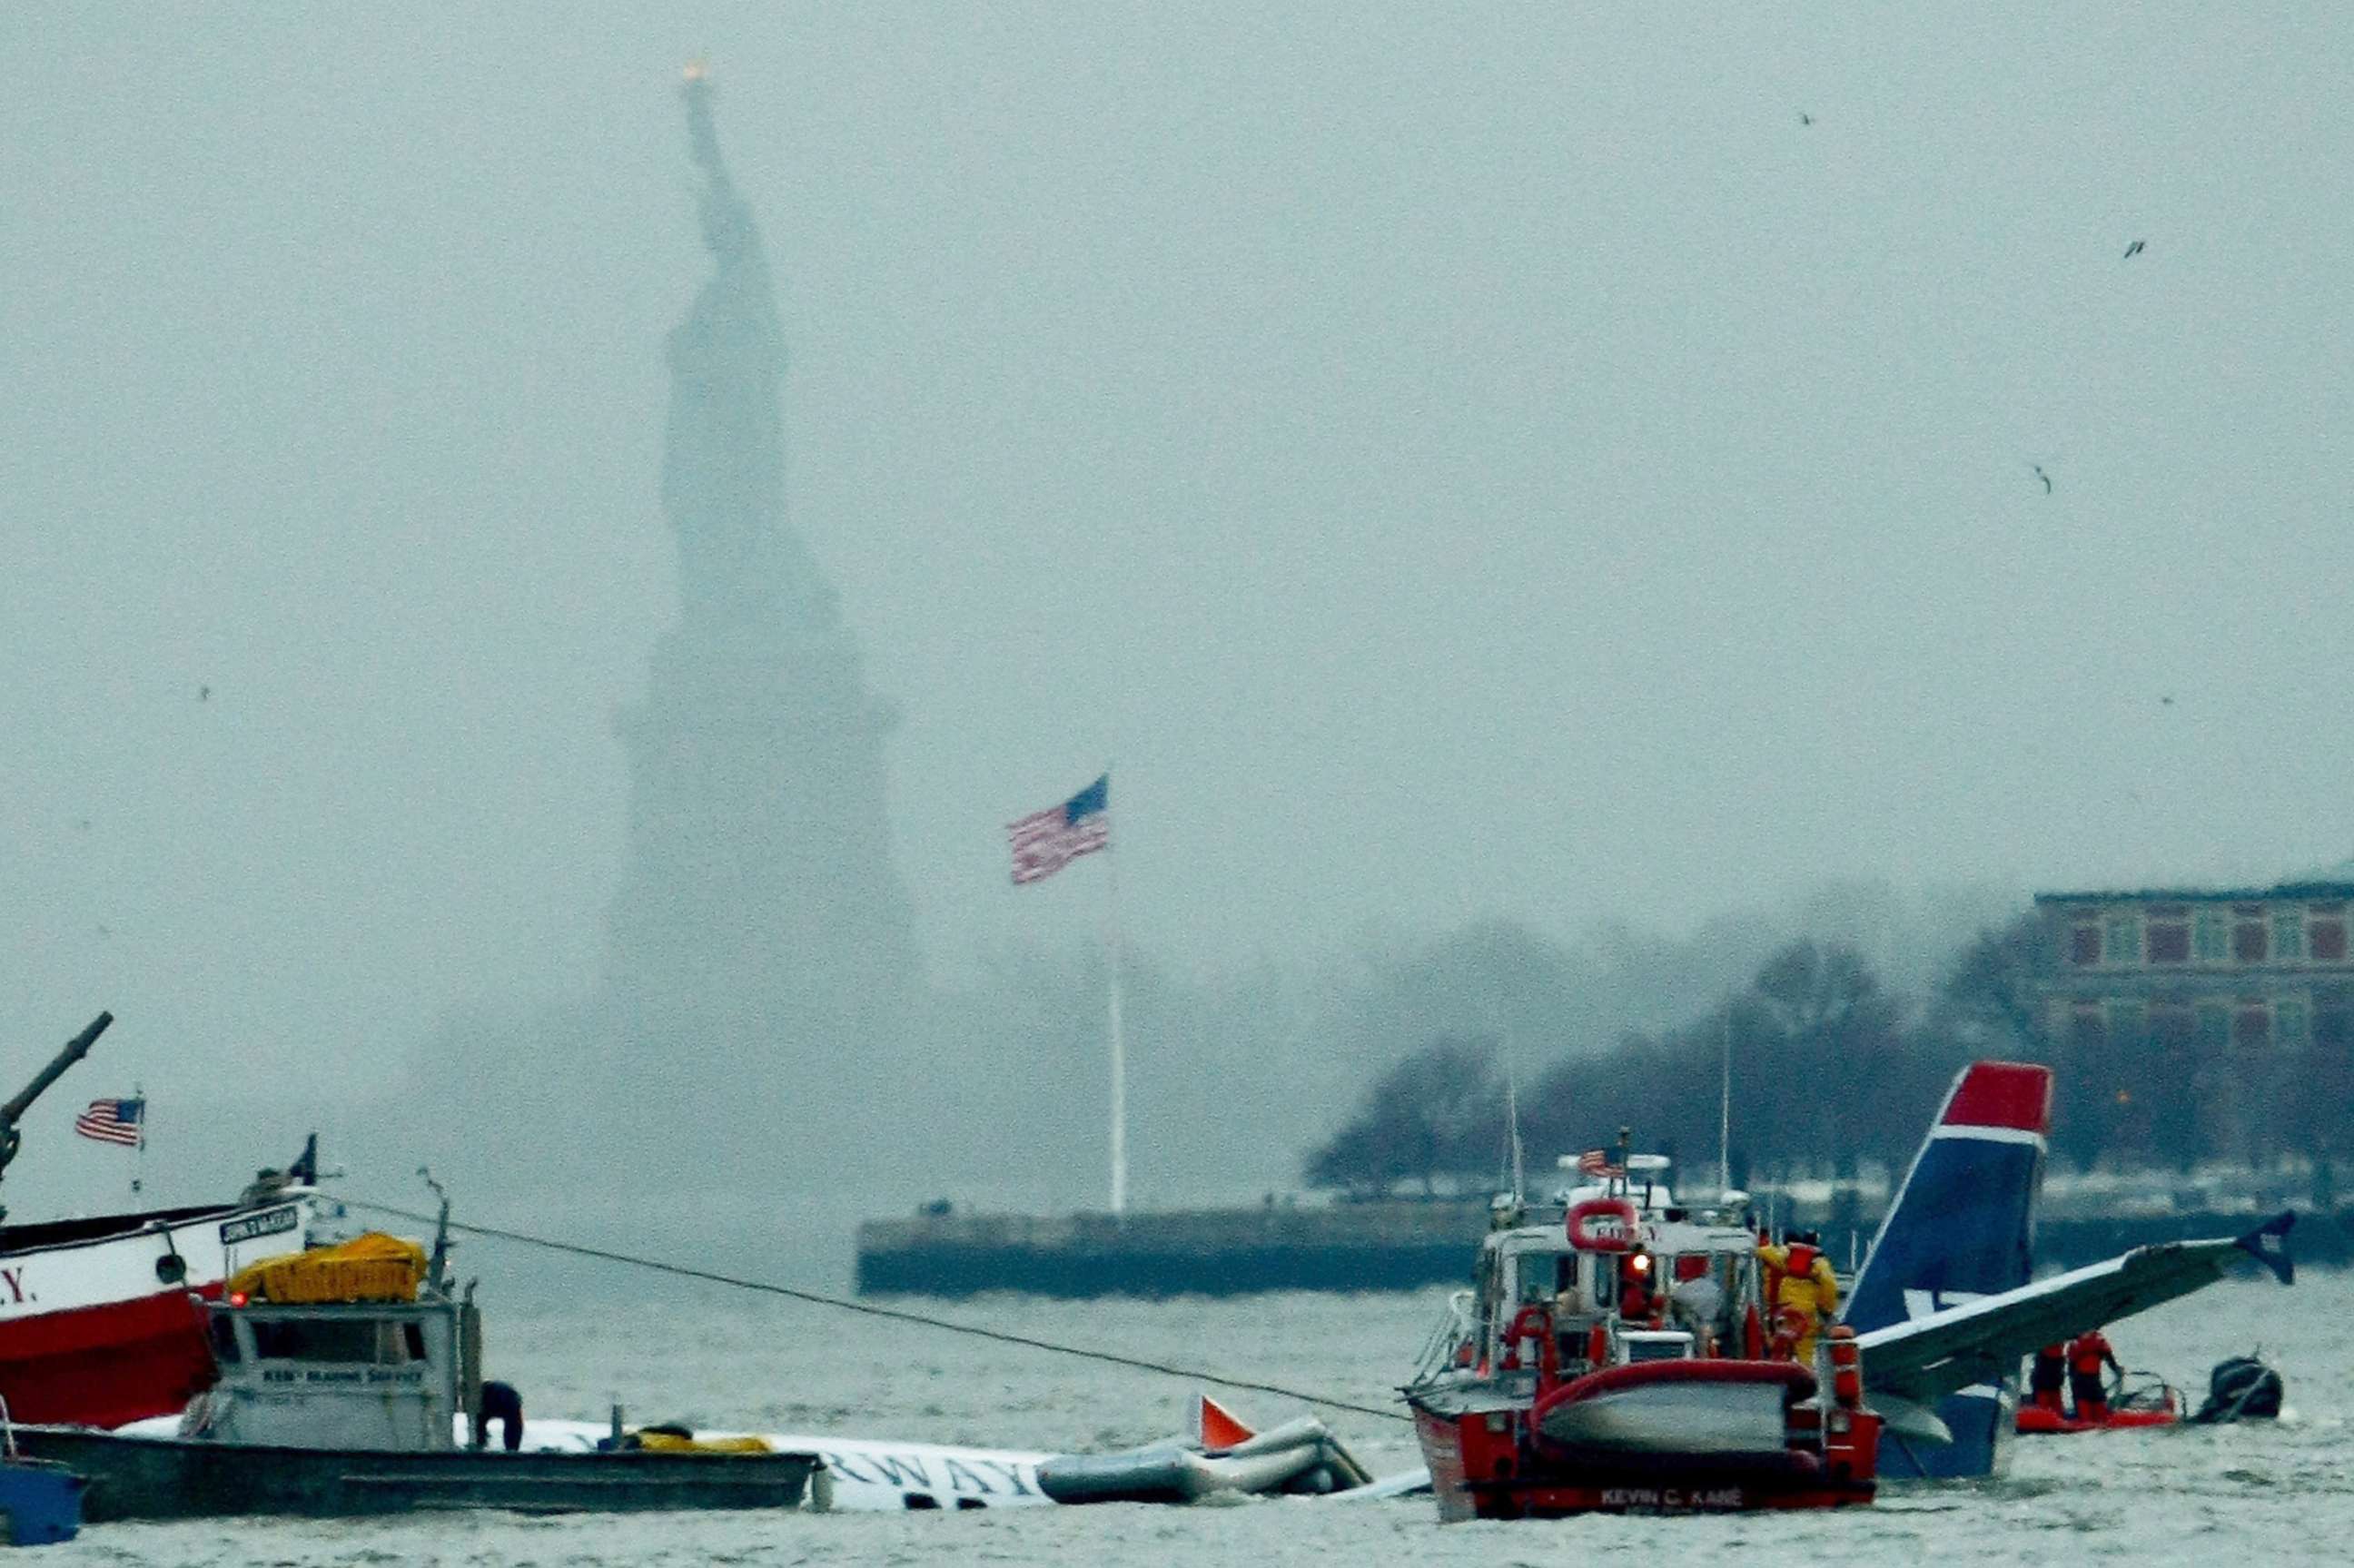 PHOTO: The statue of liberty stands in the background as rescue boats float next to a US Airways plane floating in the water after crashing into the Hudson River in New York, Jan. 15, 2009.